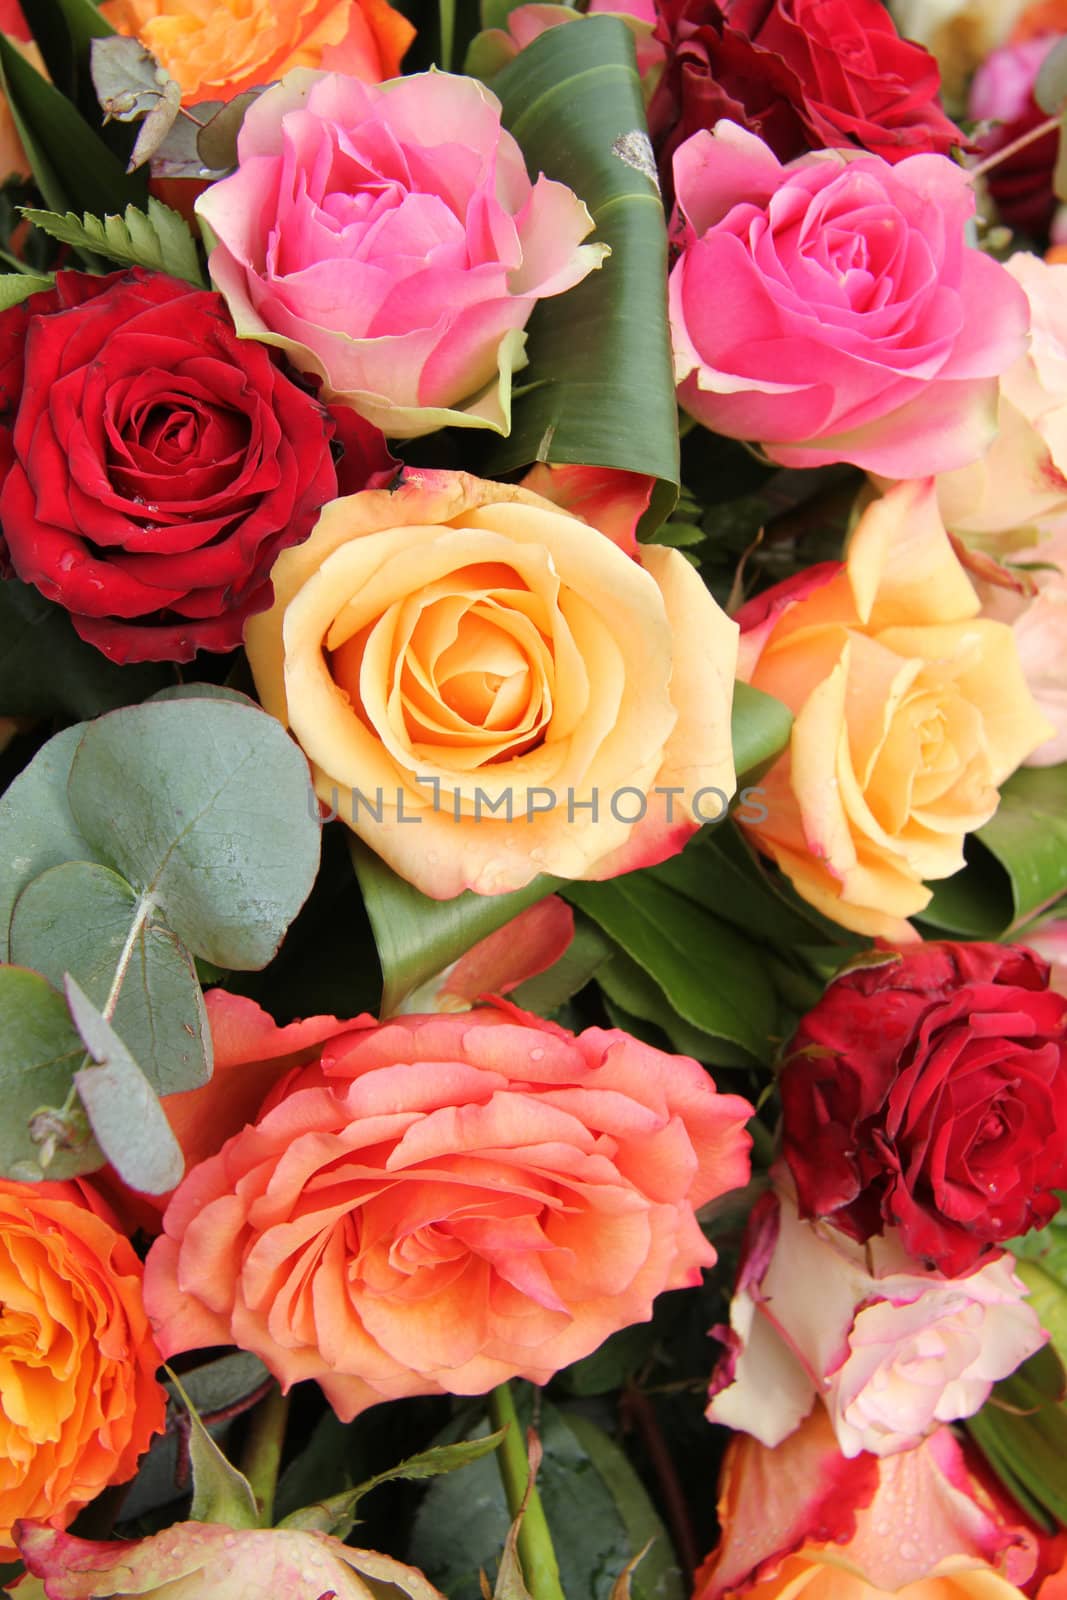 Big roses in various colors in a rose bouquet